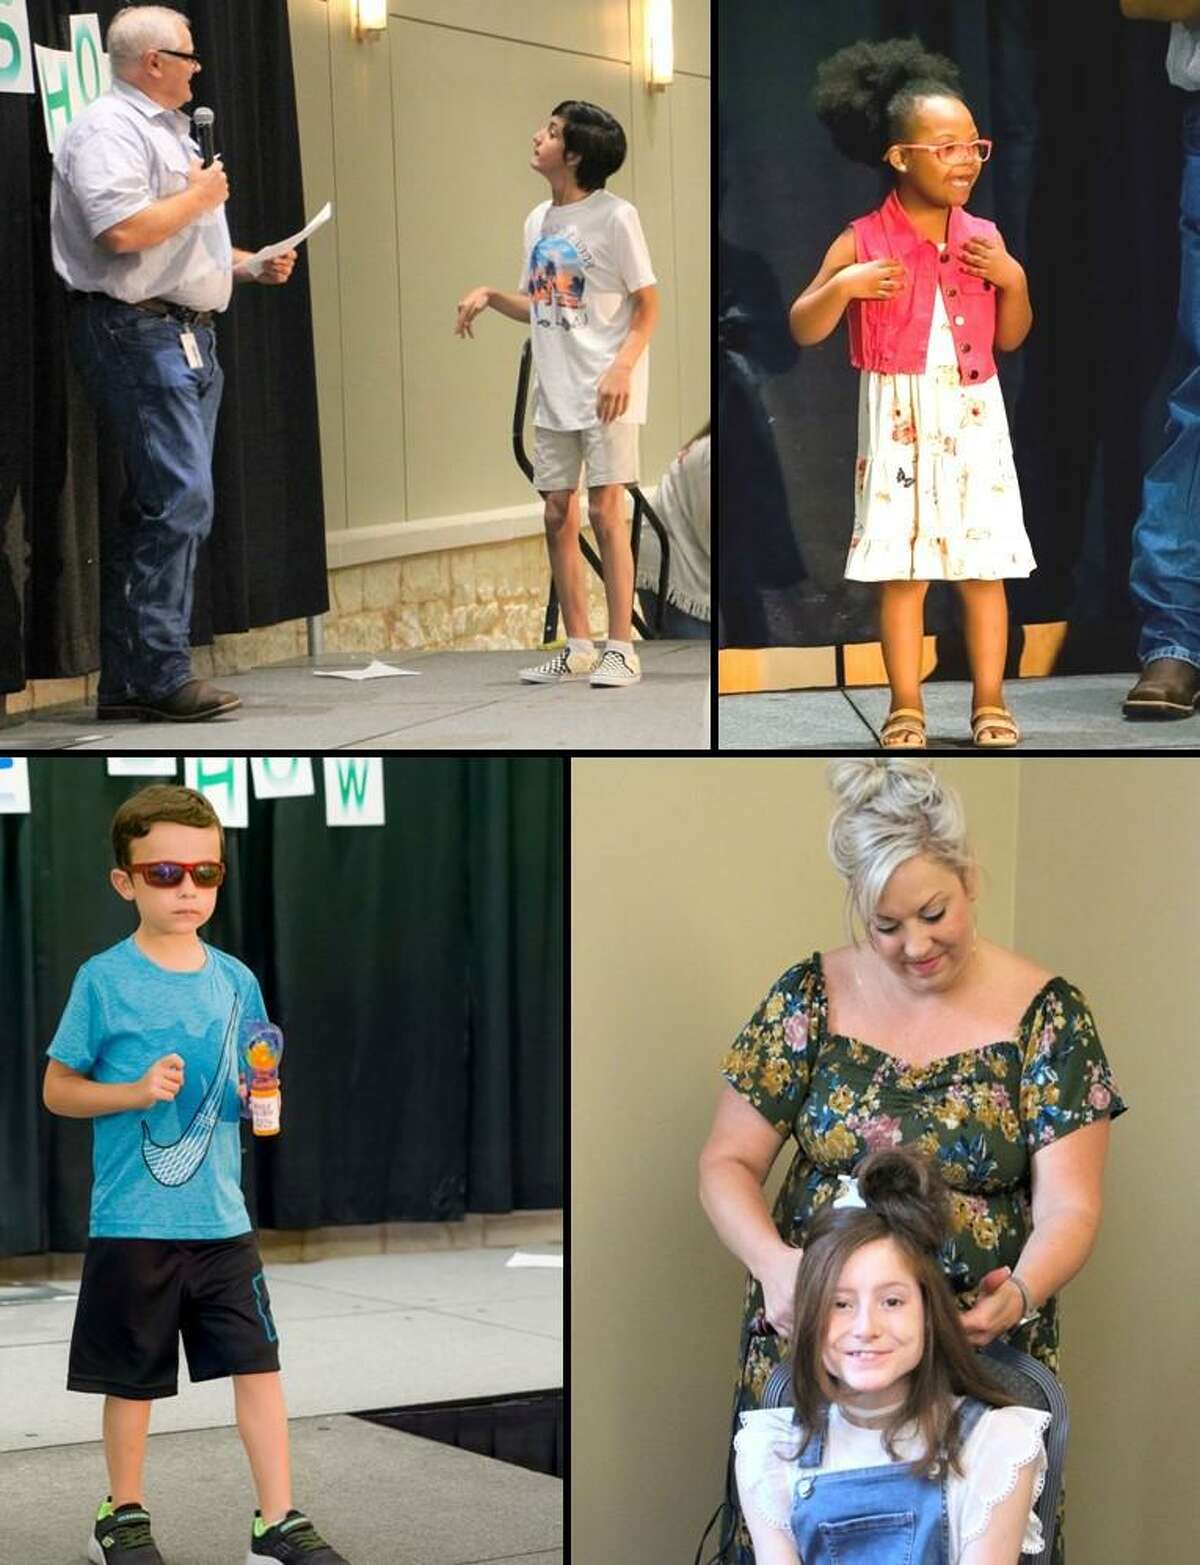 Shining Stars - Last week the Conroe Noon Lions Club hosted a Summer Style Show and treated future Texas Lions Camp - campers to a day of fashion, style and fun. Pictured: top (l-r) Emcee Lion Scott Perry jokes with Daniel on the runway, while a young Rylee shows off her new treads. Bottom (l-r) David is ready for summer in his cool new shades and Avery gets a new ‘do’ from Stylist Ali Krueger.